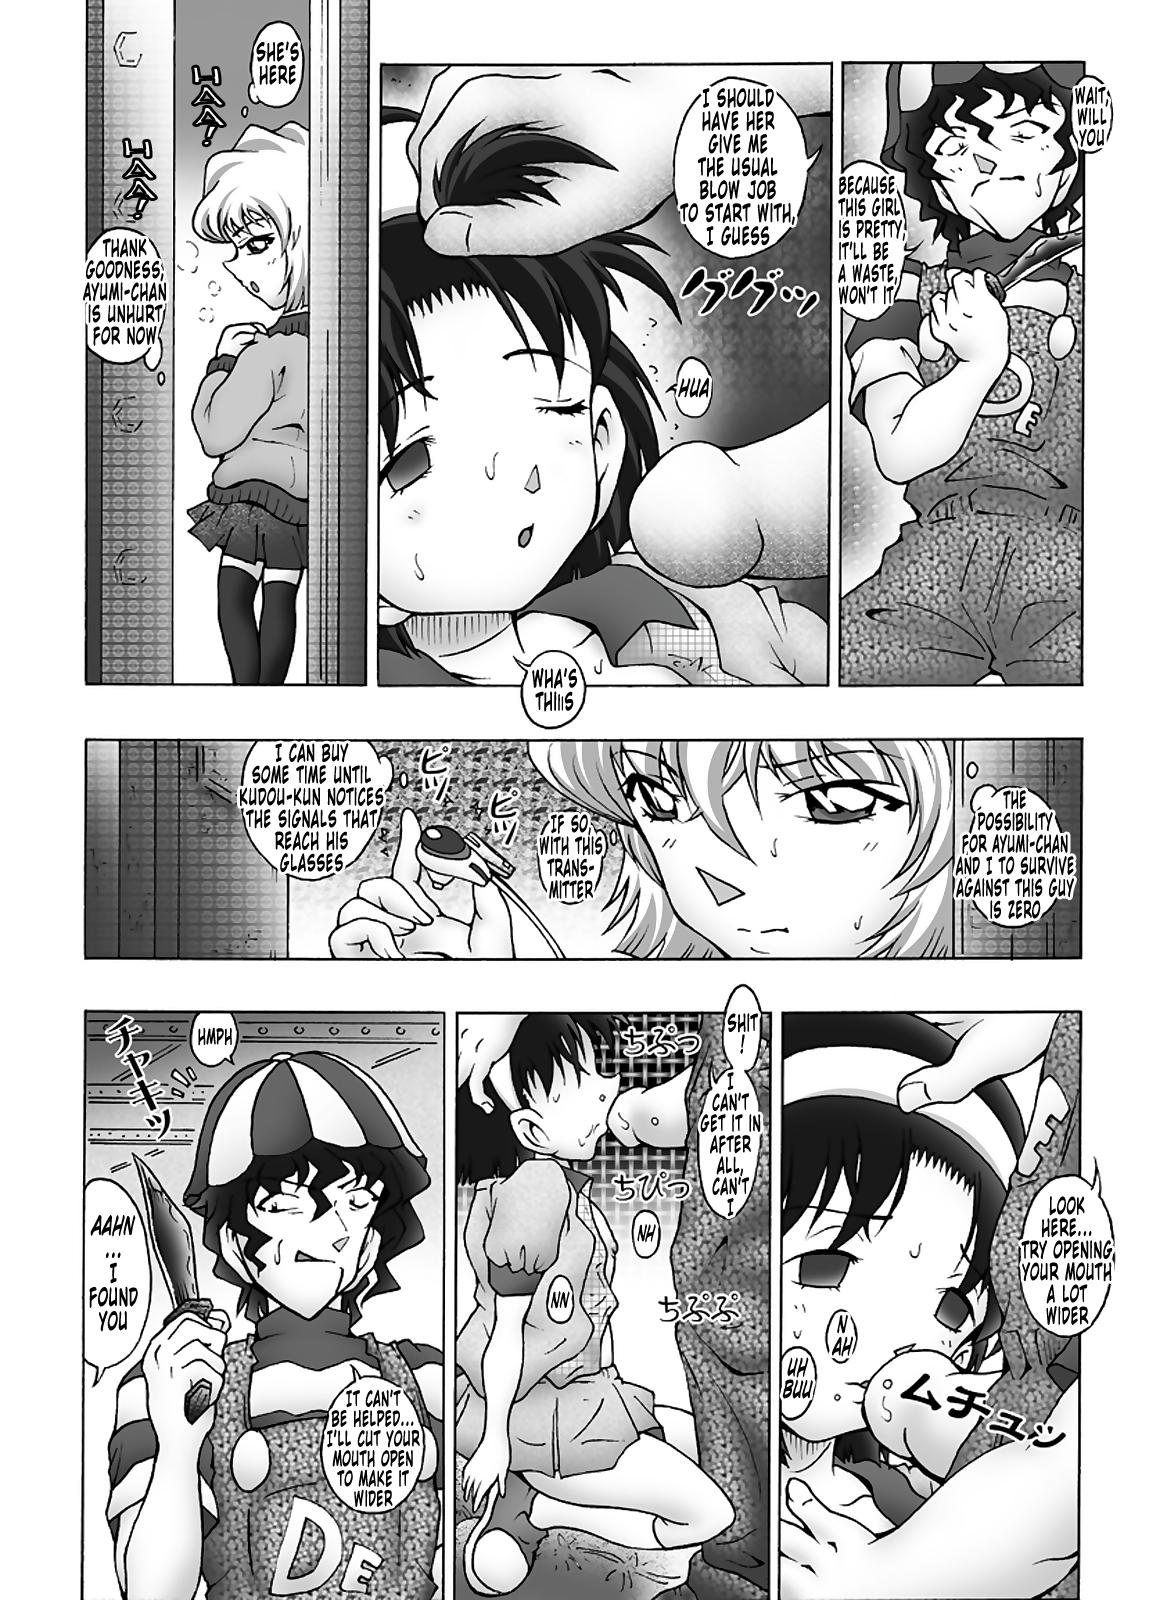 Perfect Butt Bumbling Detective Conan - File 11: The Mystery Of Jack The Ripper's True Identity - Detective conan Omegle - Page 7